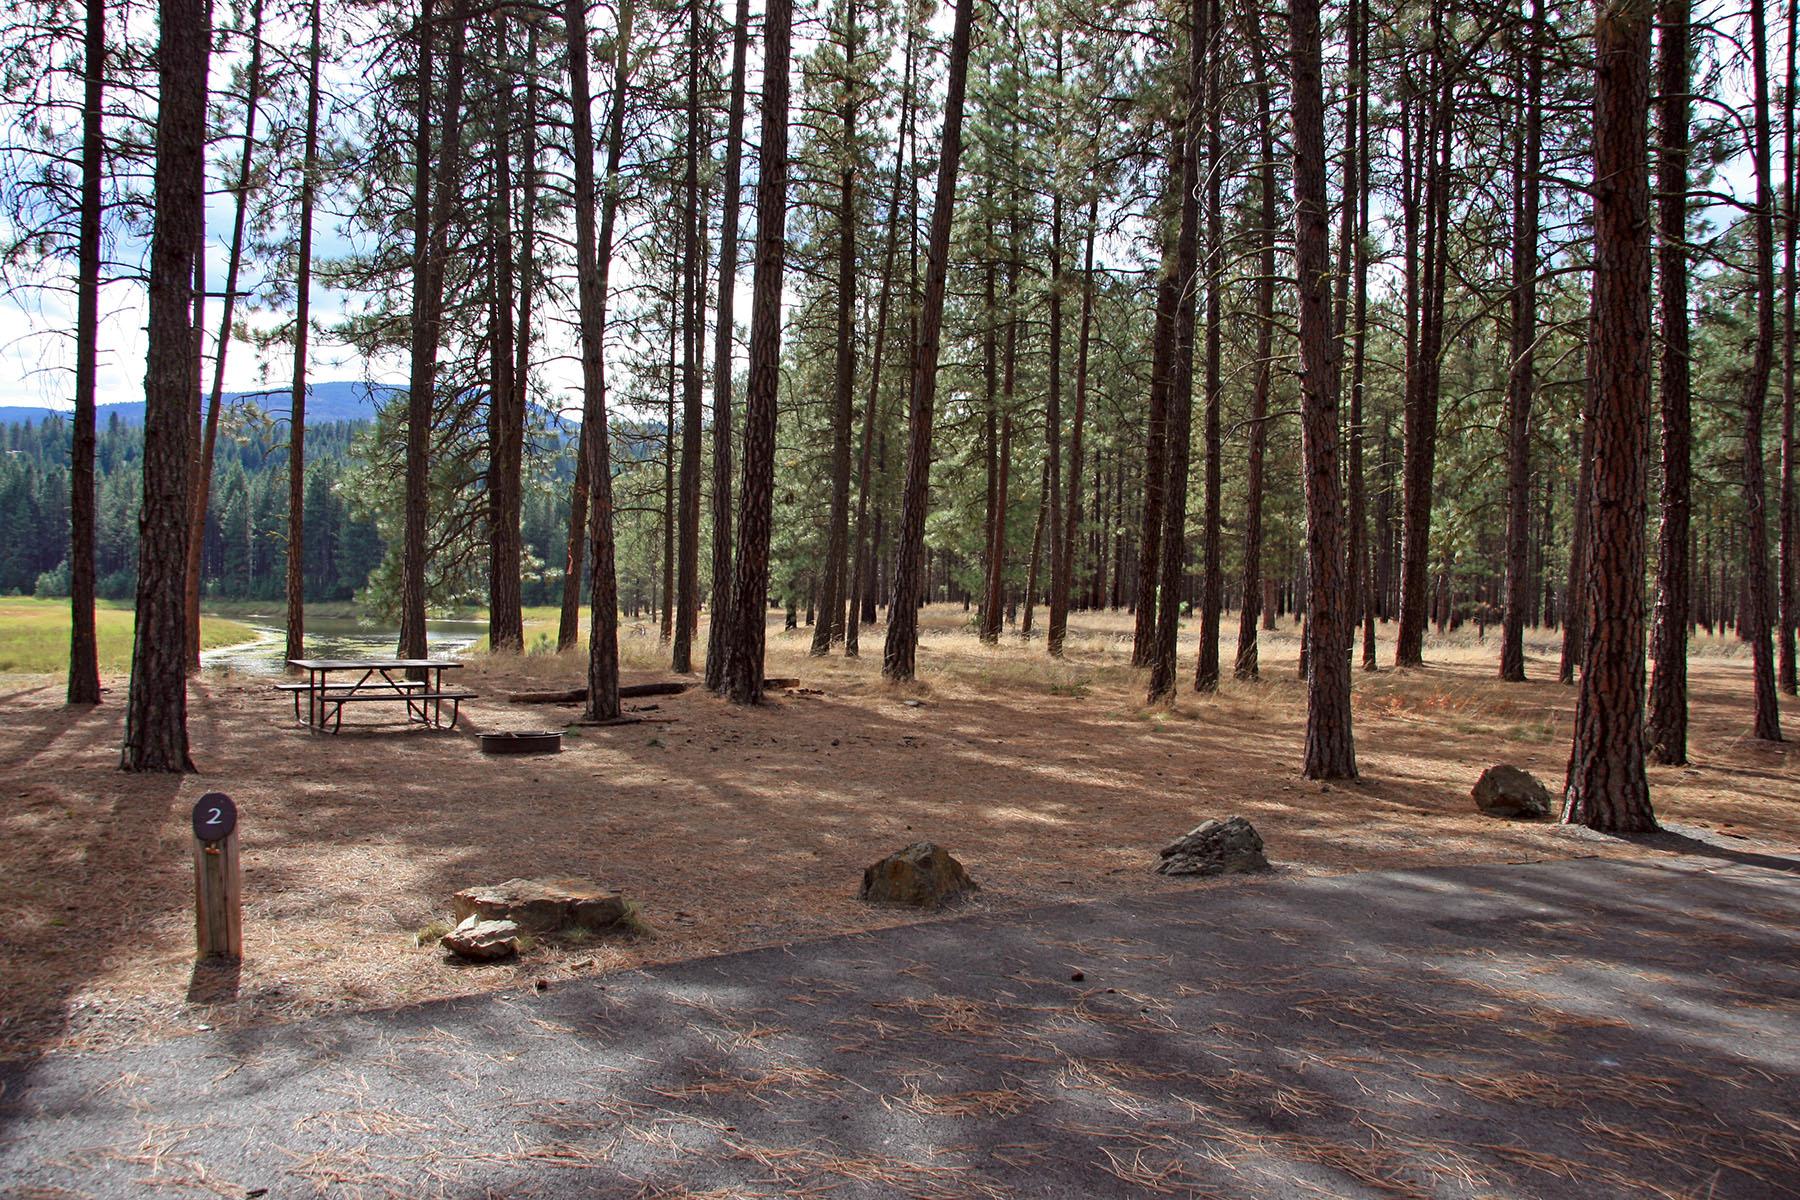 shaded campsite with paved parking space